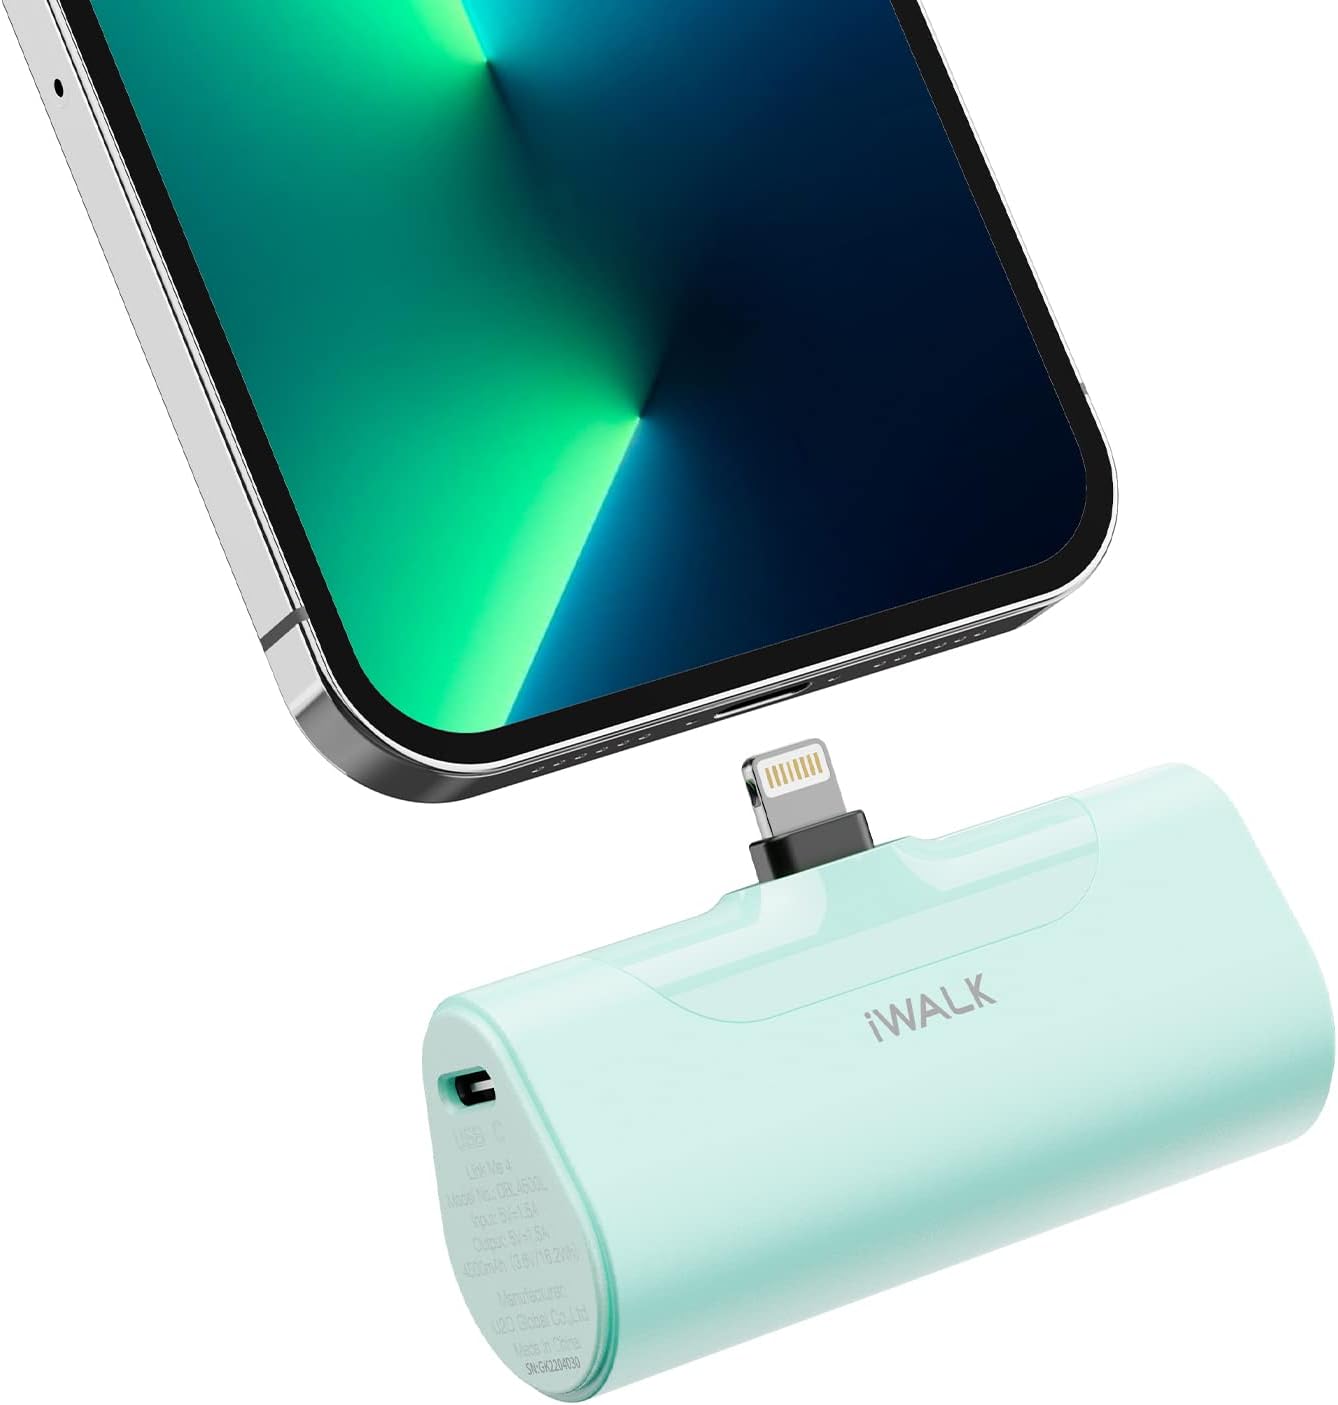 iWALK Small Portable Charger 4500mAh Ultra-Compact Power Bank Battery Pack iPhone